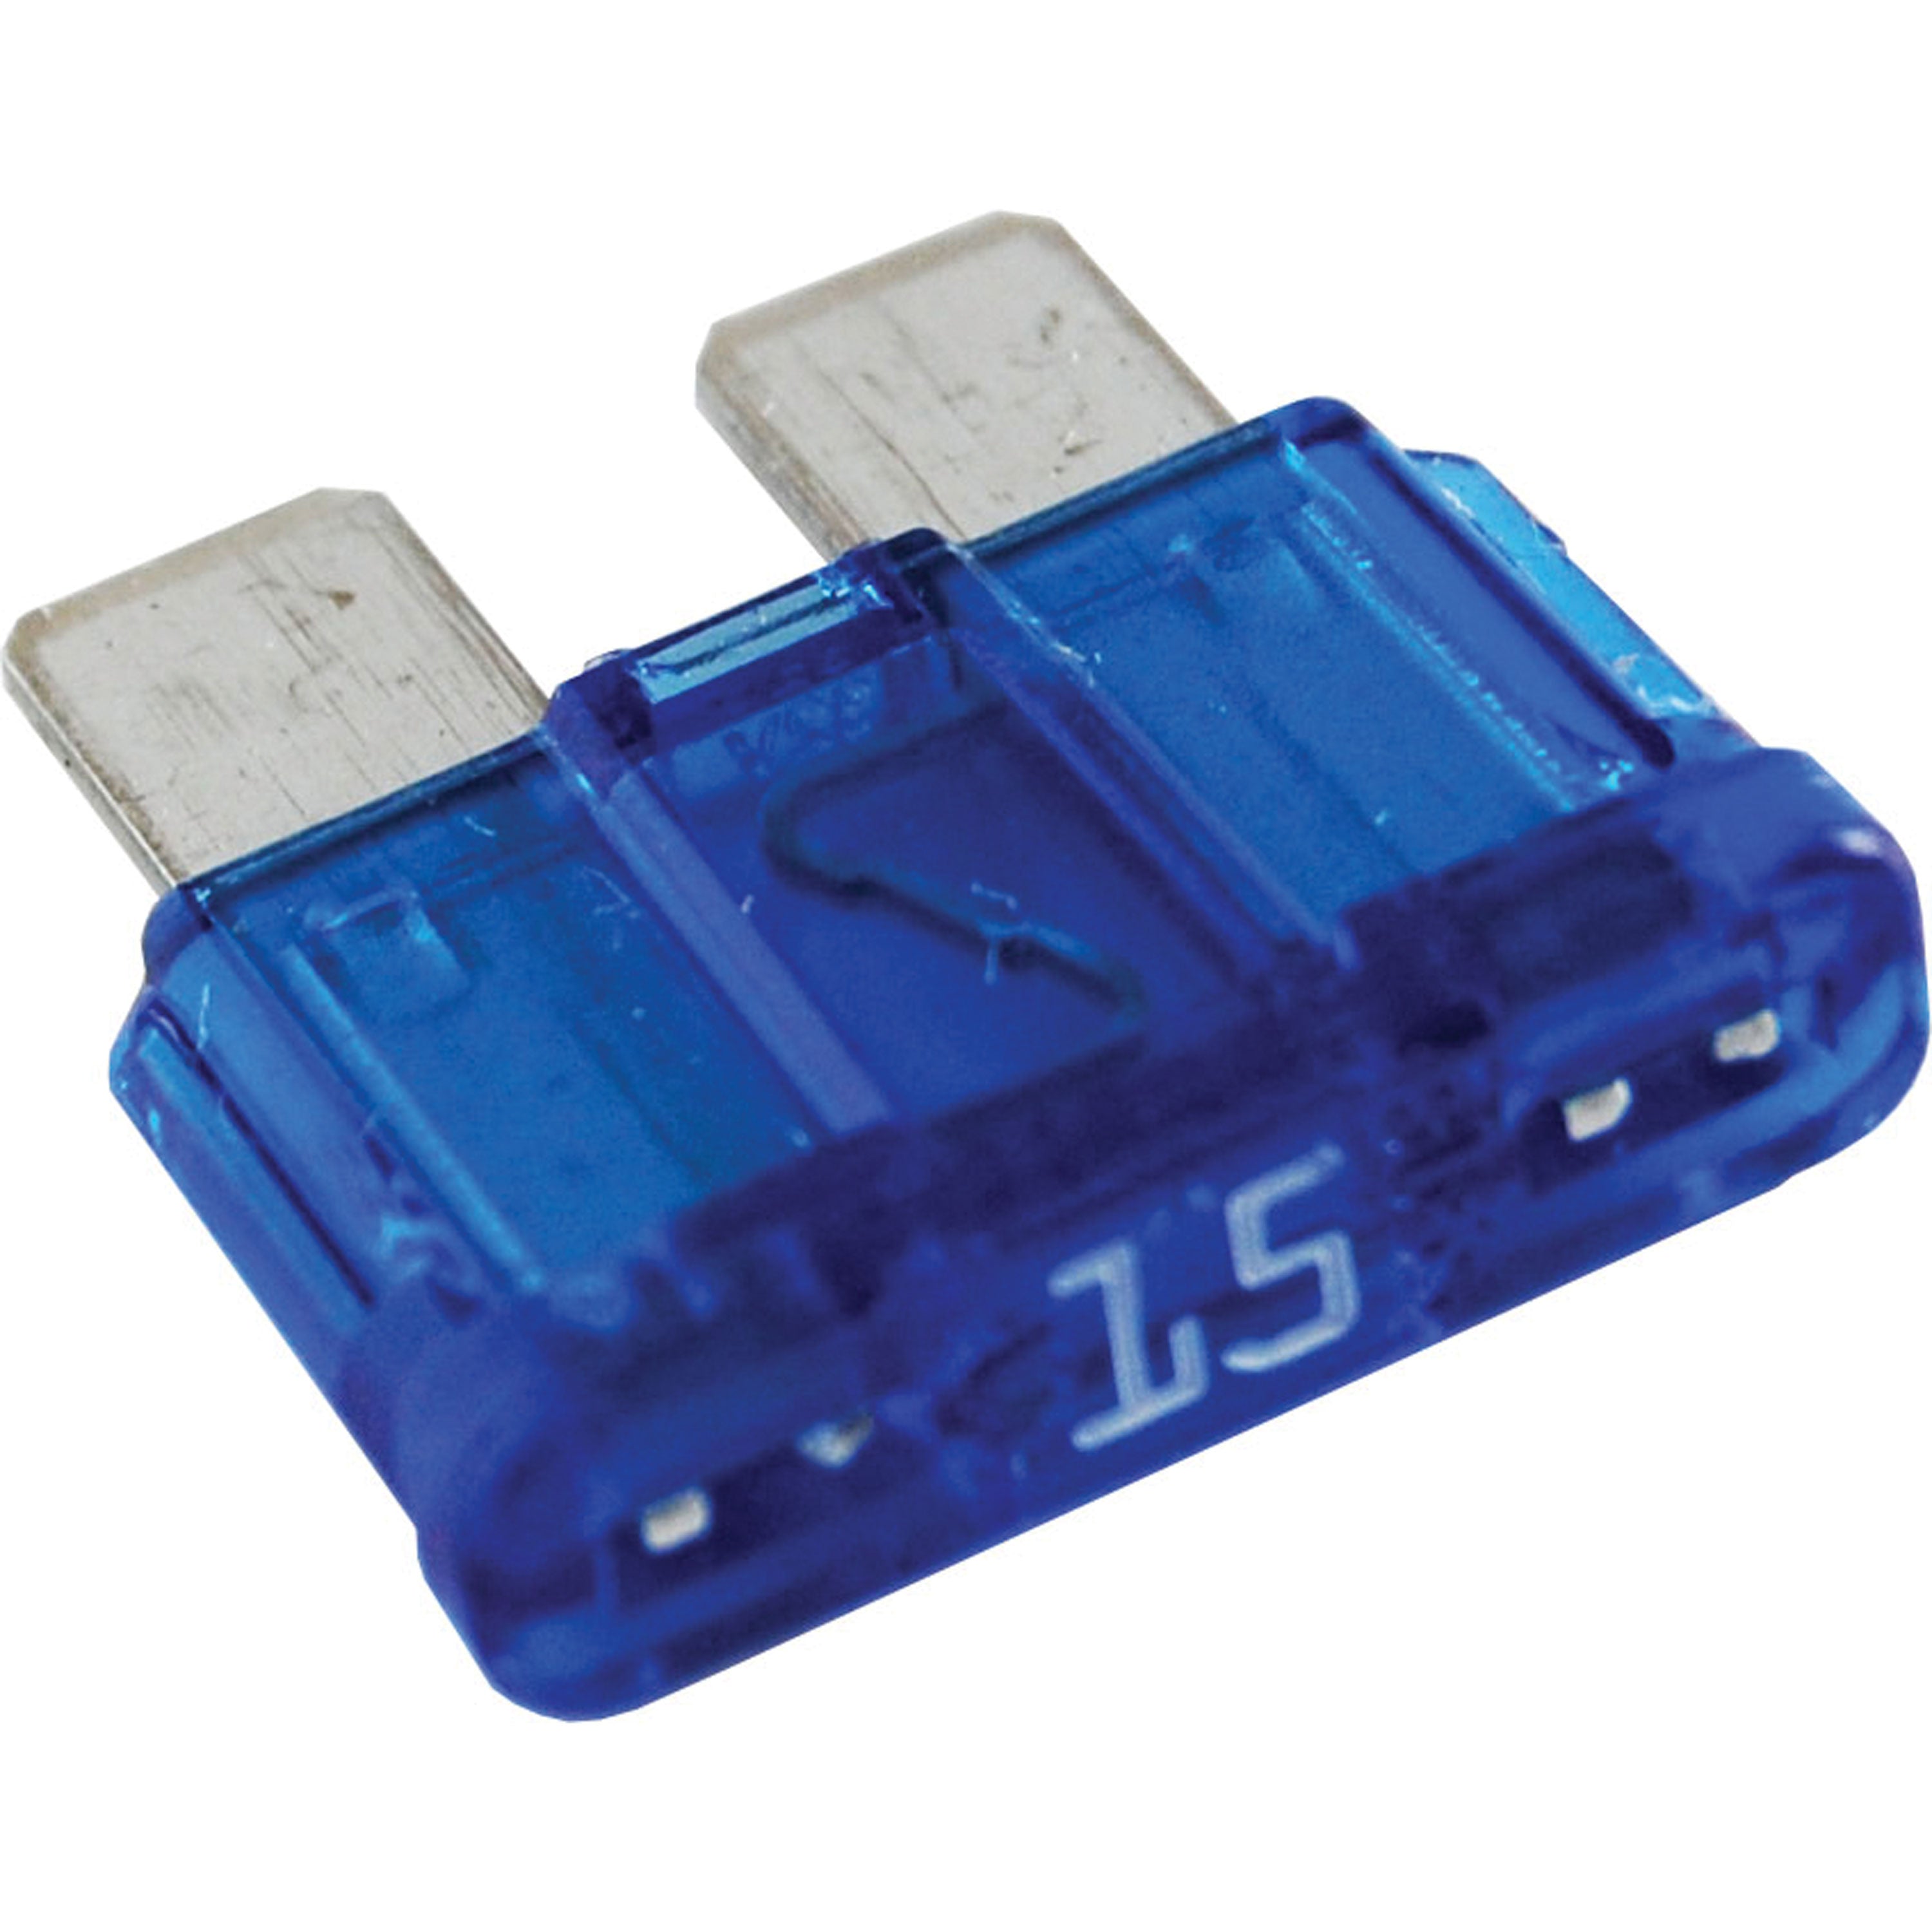 Blue Sea Systems 5242-BSS ATO / ATC Fuse - 15 Amp, Pack of 2